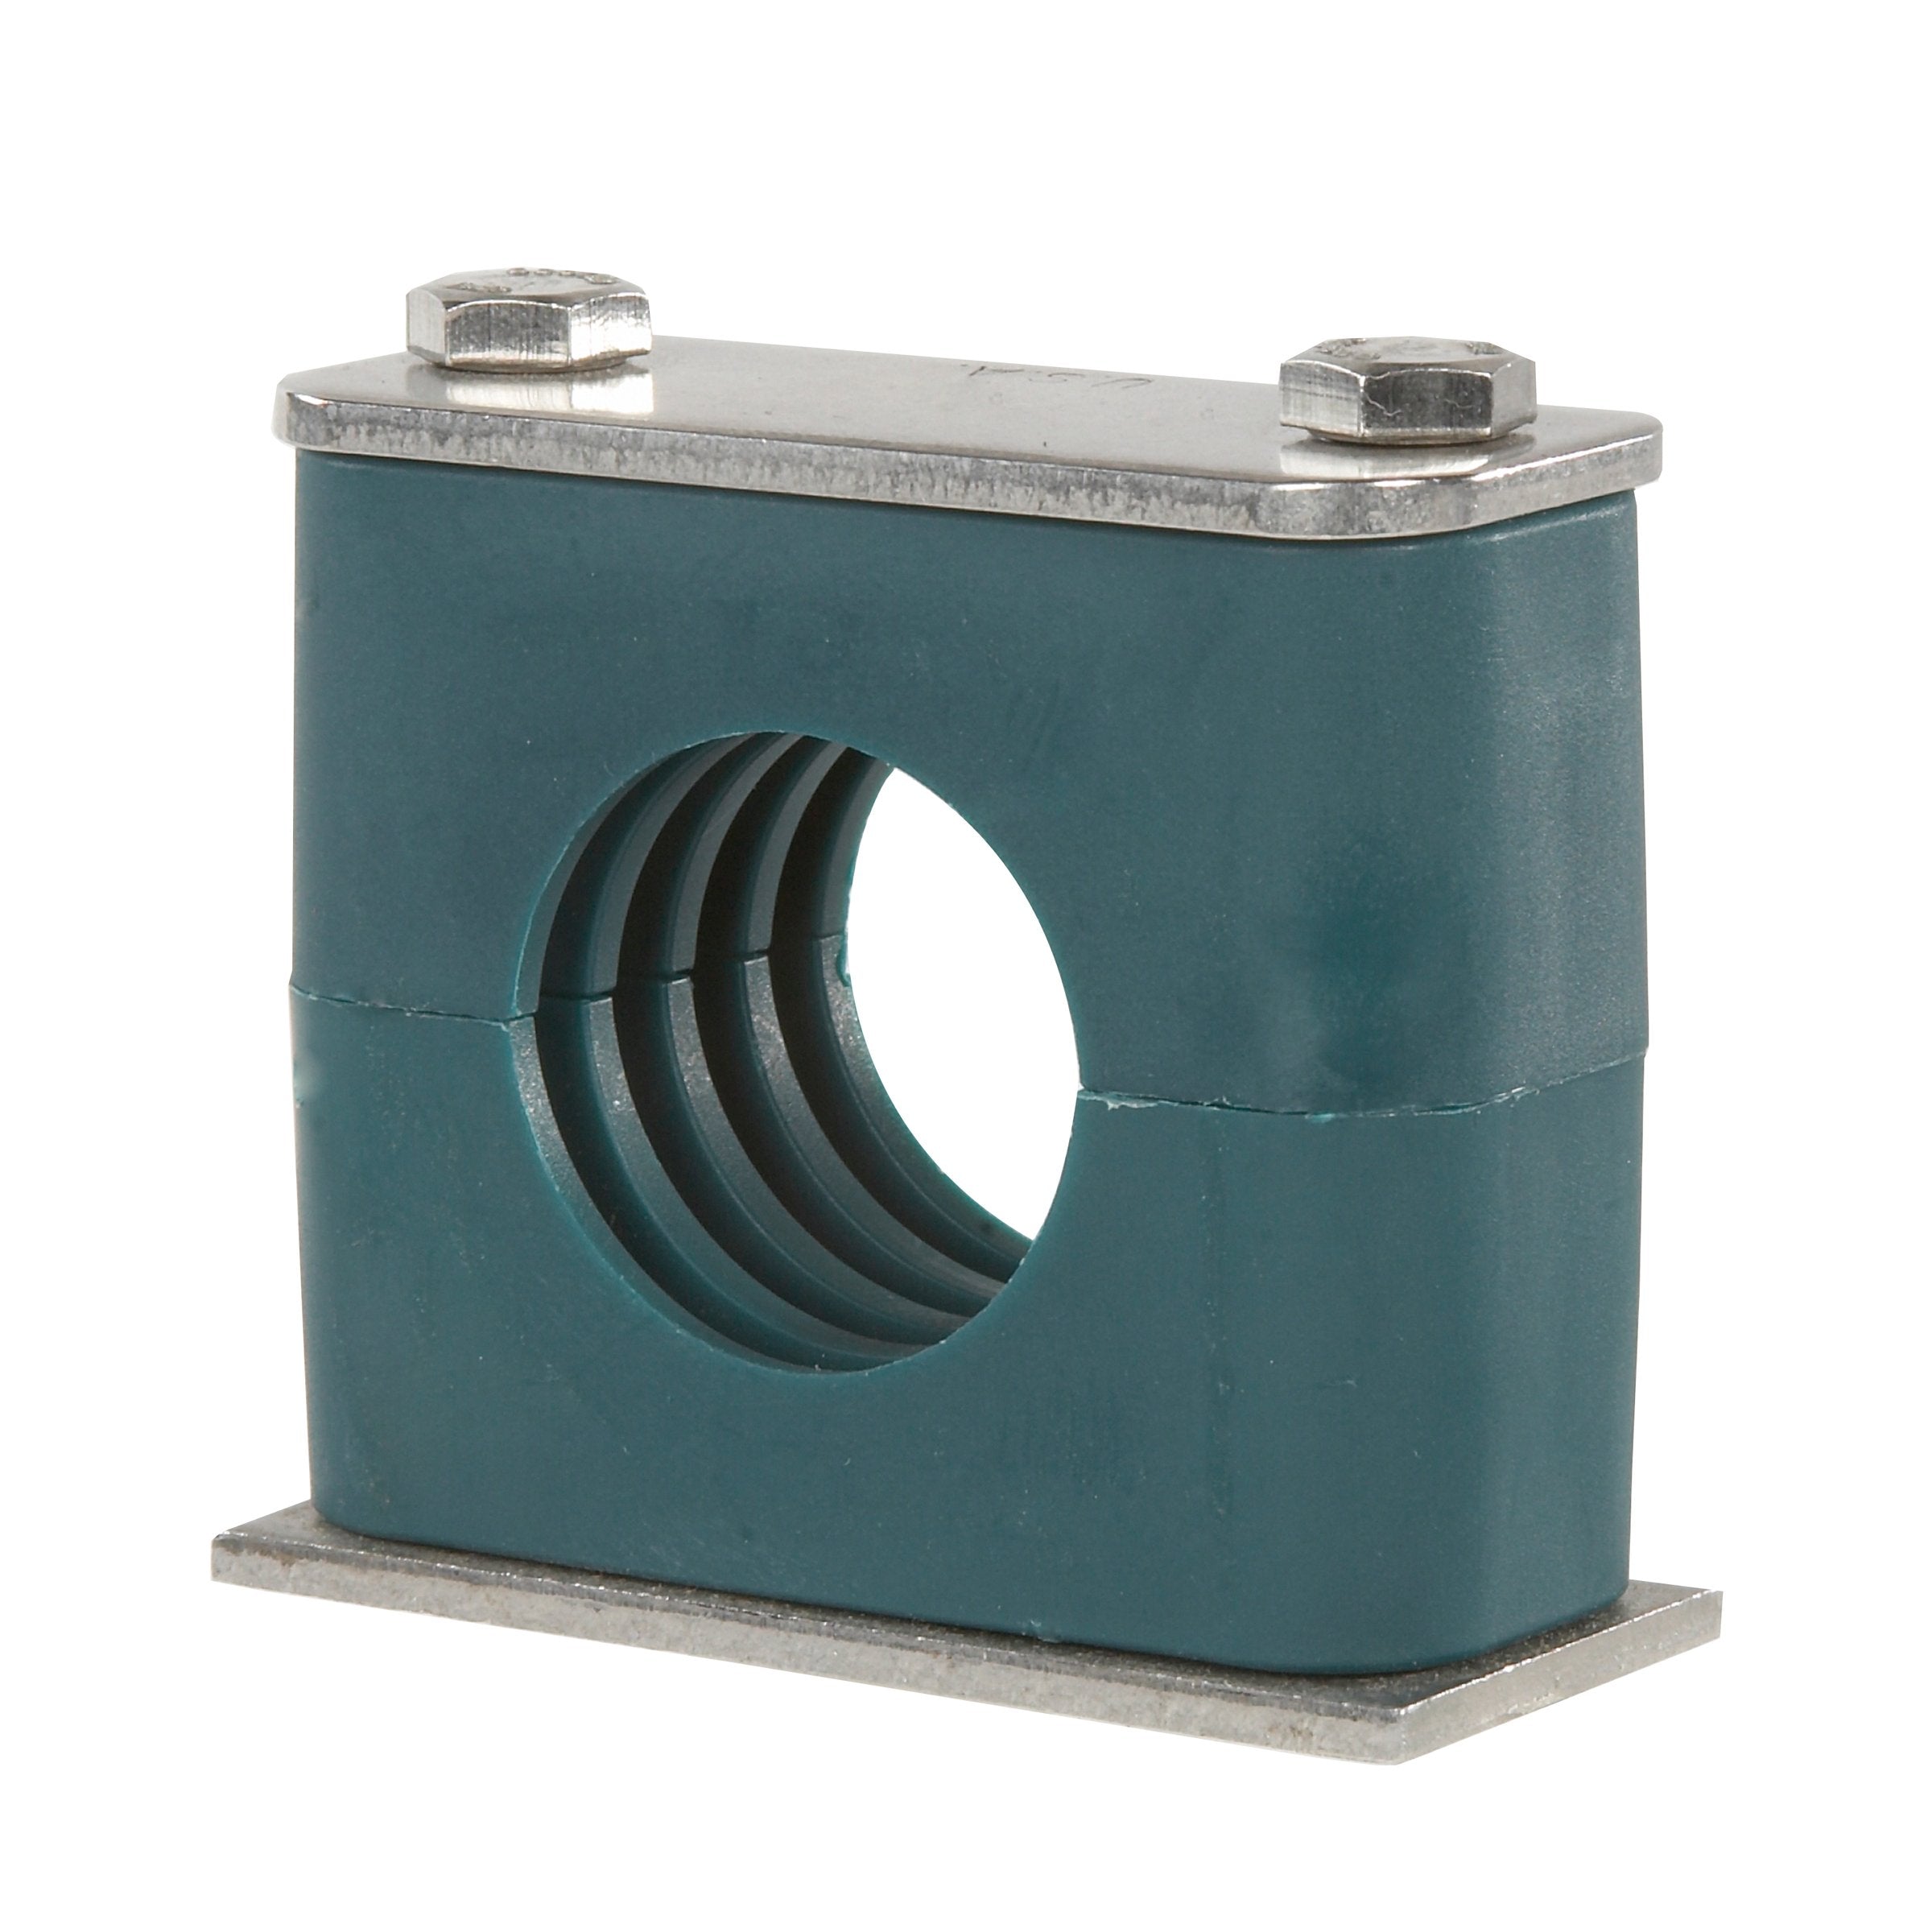 SP-213.5-PP-DP-AS-U-W5 : Stauff Clamp, Single Weld Plate, 0.53" (13.5mm) OD, for 1/4" Pipe, Green PP Insert, Profiled Interior, 316SS